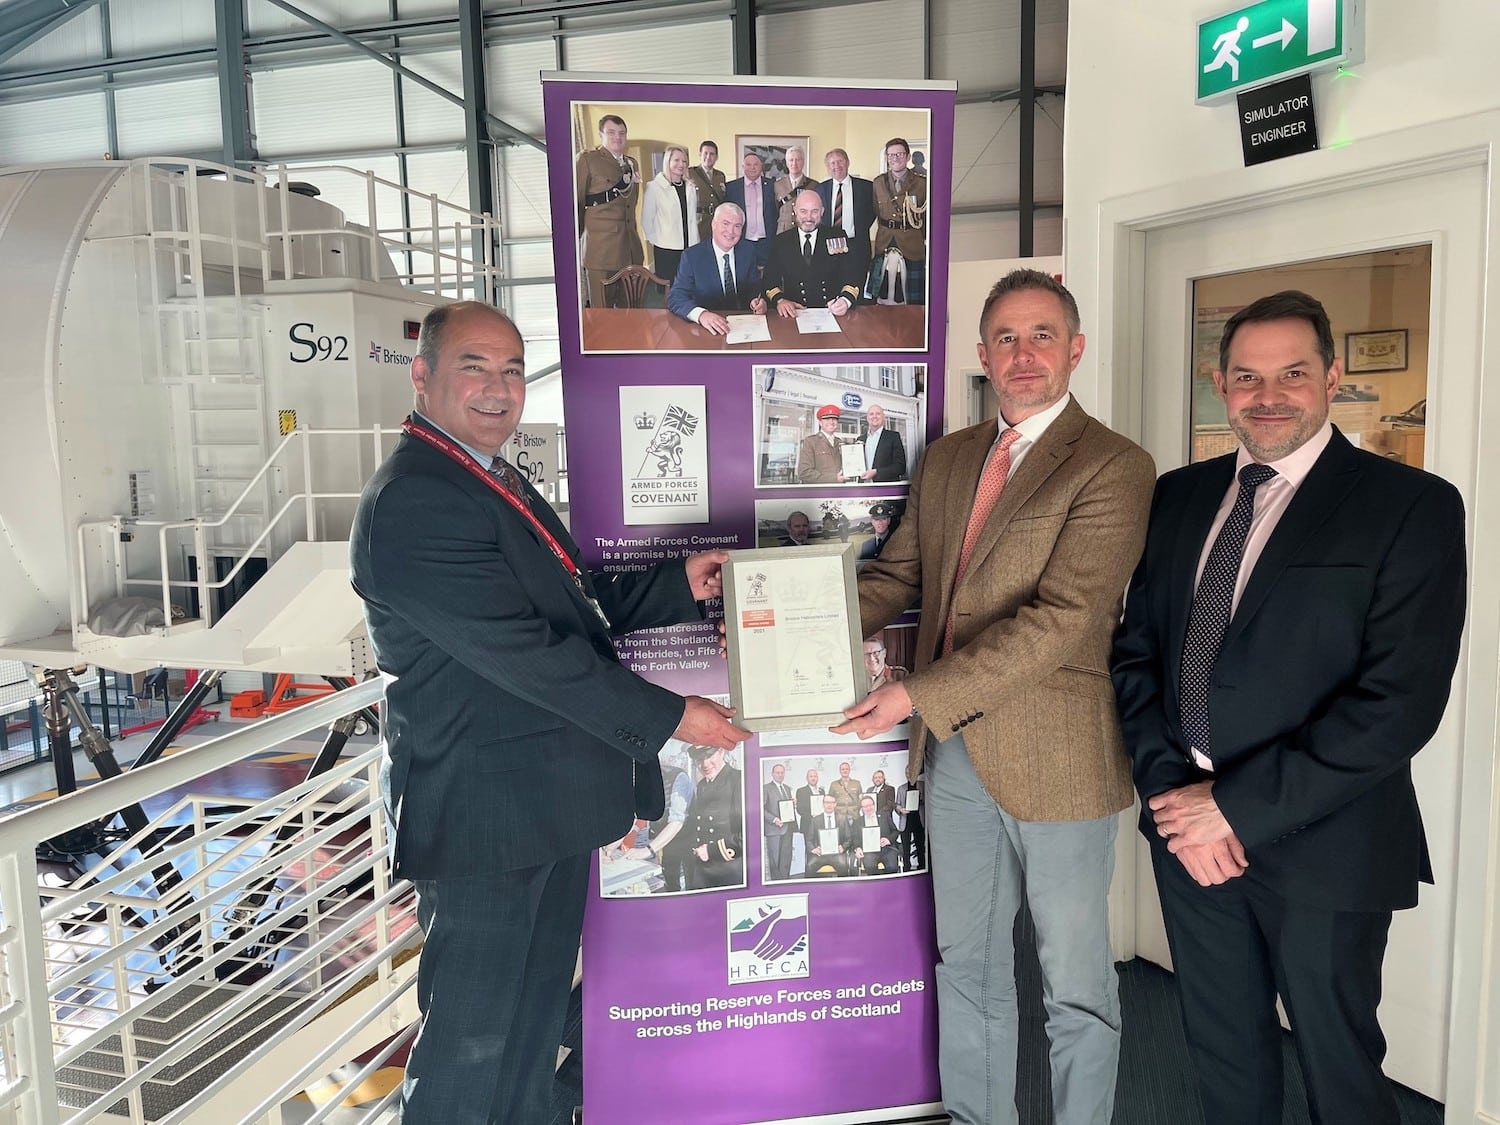 from left, Ray Watt of HRFCA, Neil Ebberson, Director UKSAR at Bristow Helicopters, and Matt Rhodes, Director UK Oil & Gas at Bristow Helicopters.